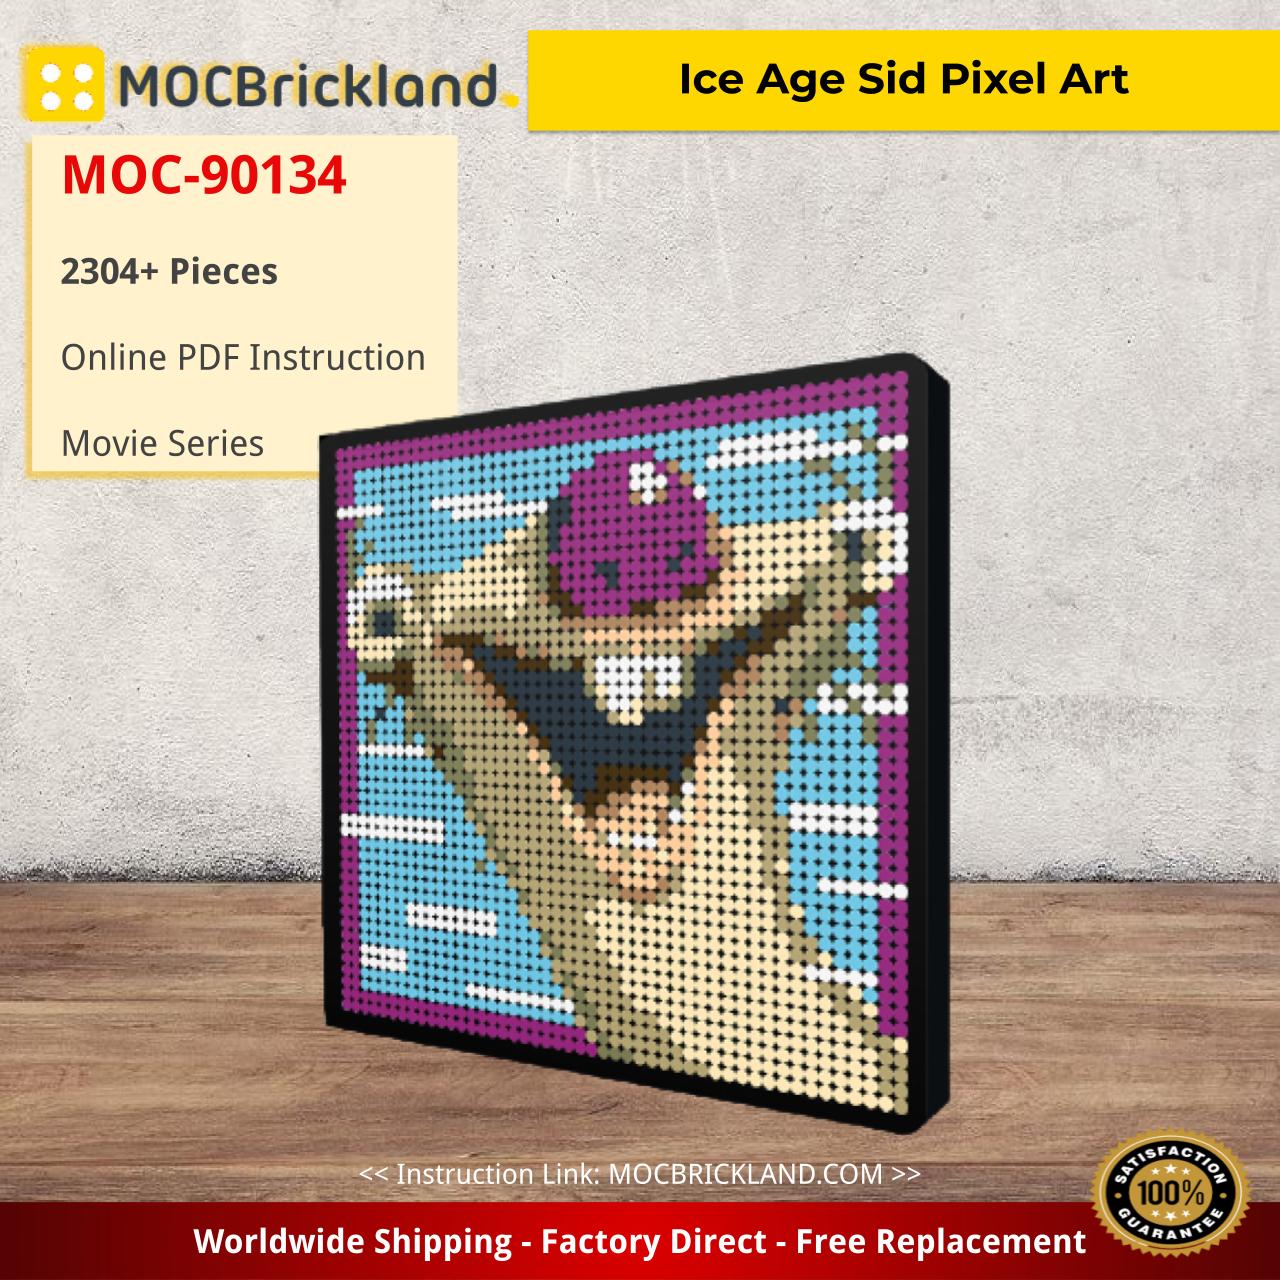 Ice Age Sid Pixel Art Movie MOC-90134 with 2304 pieces